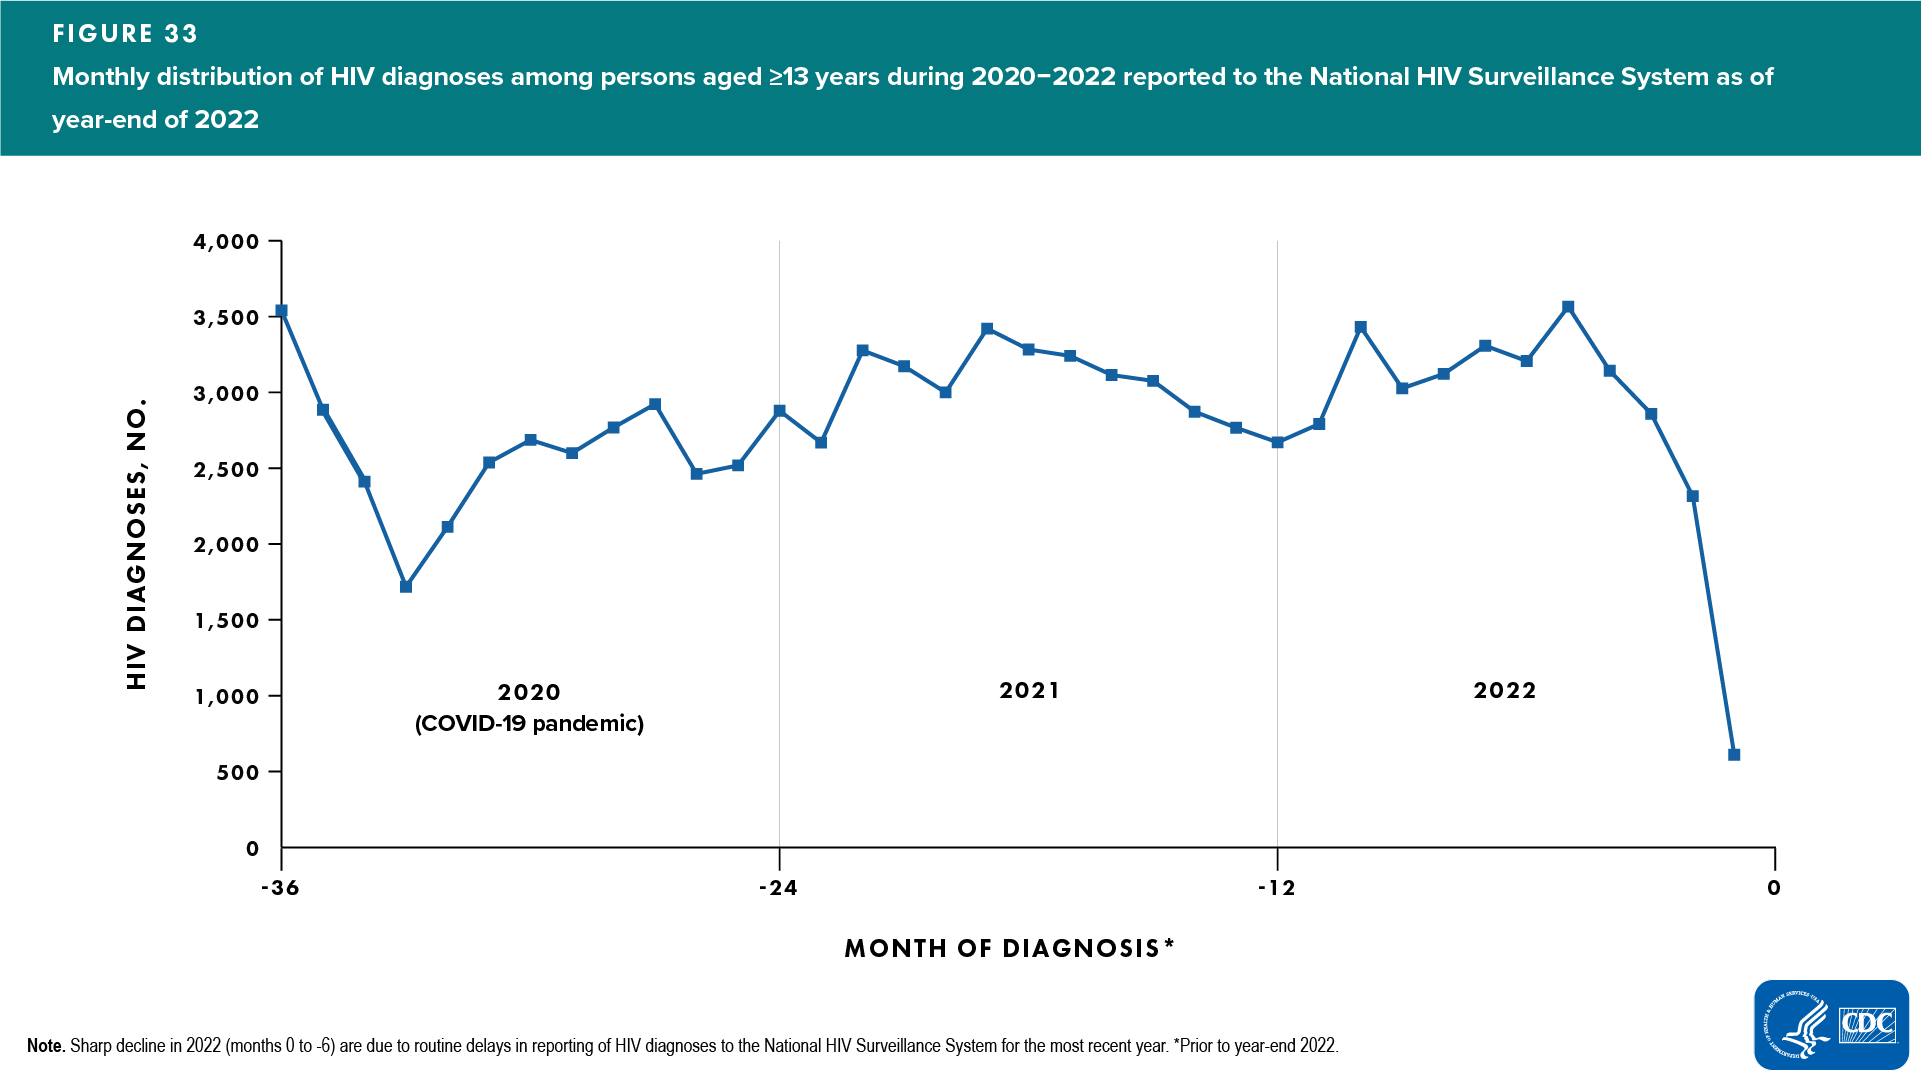 Figure 33. Monthly distribution of HIV diagnoses during 2020‒2022 reported to the National HIV Surveillance System at year-end 2022